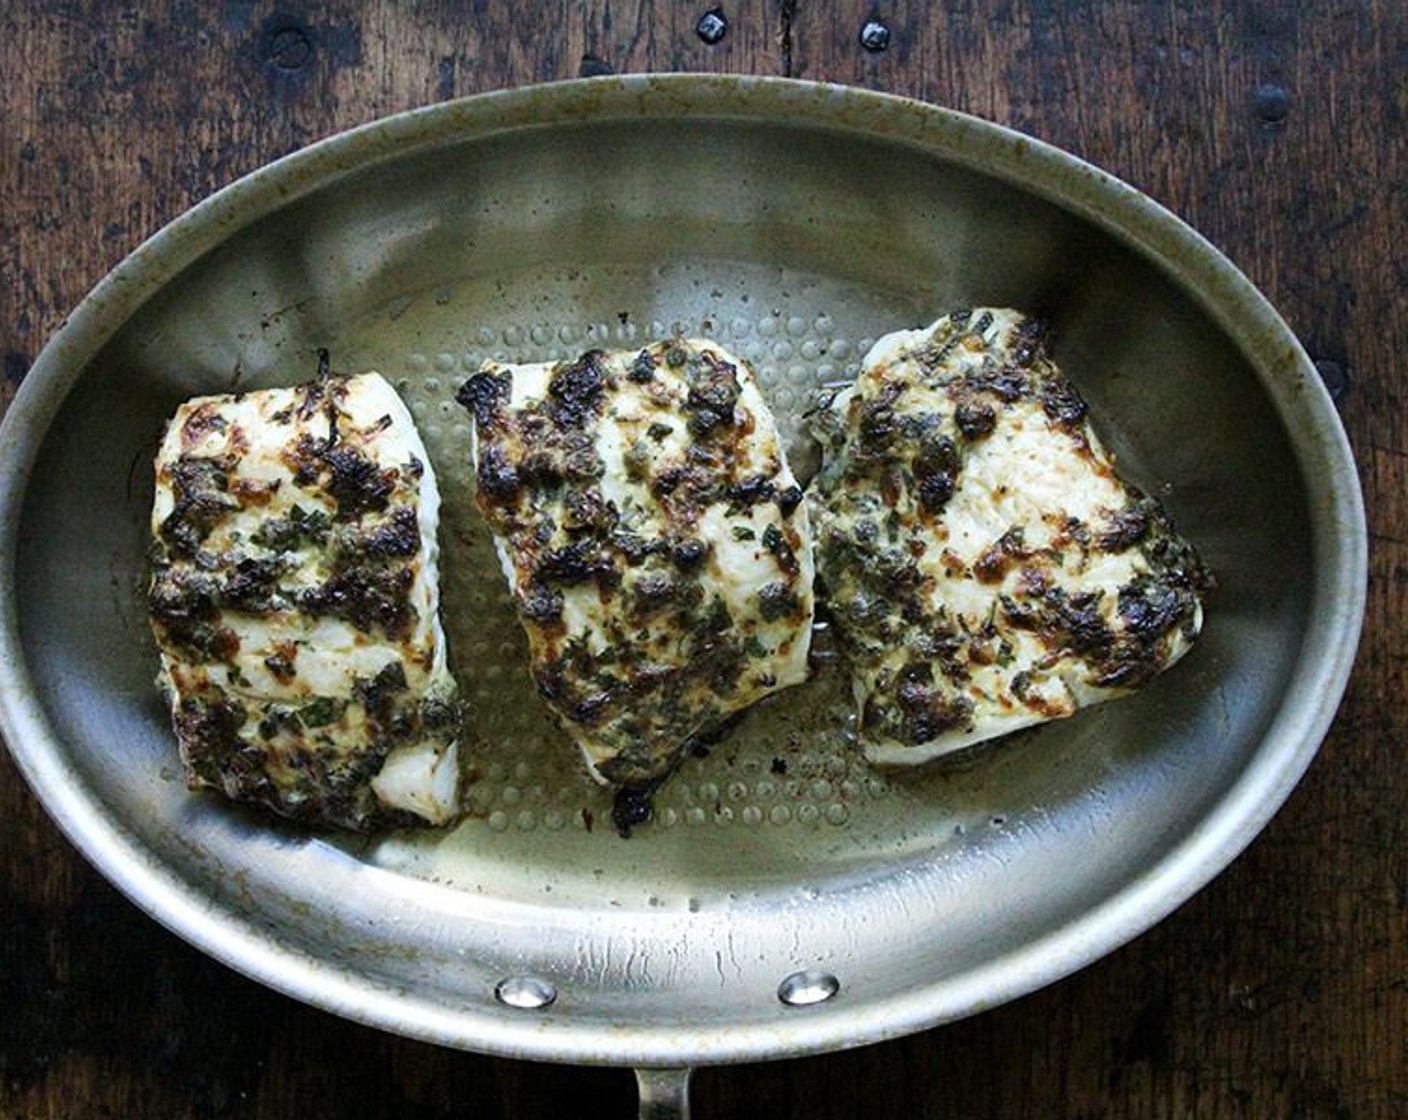 Pan-Broiled Halibut with Lemon, Capers, and Parsley